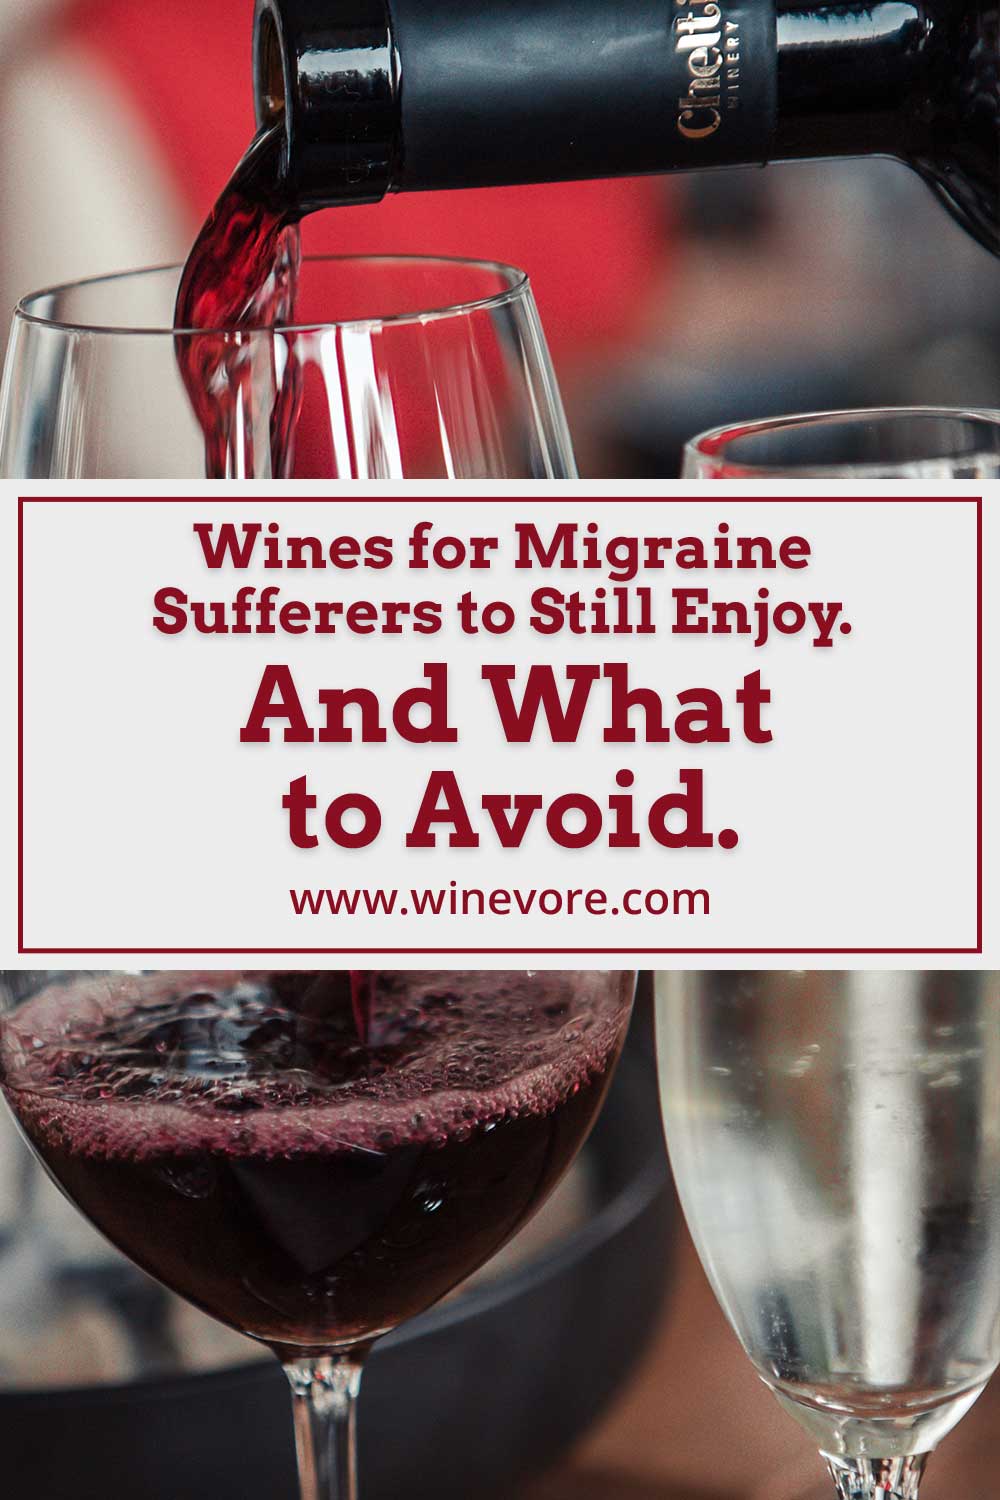 Wine is being poured into one of two wine glasses - Wines for Migraine Sufferers.